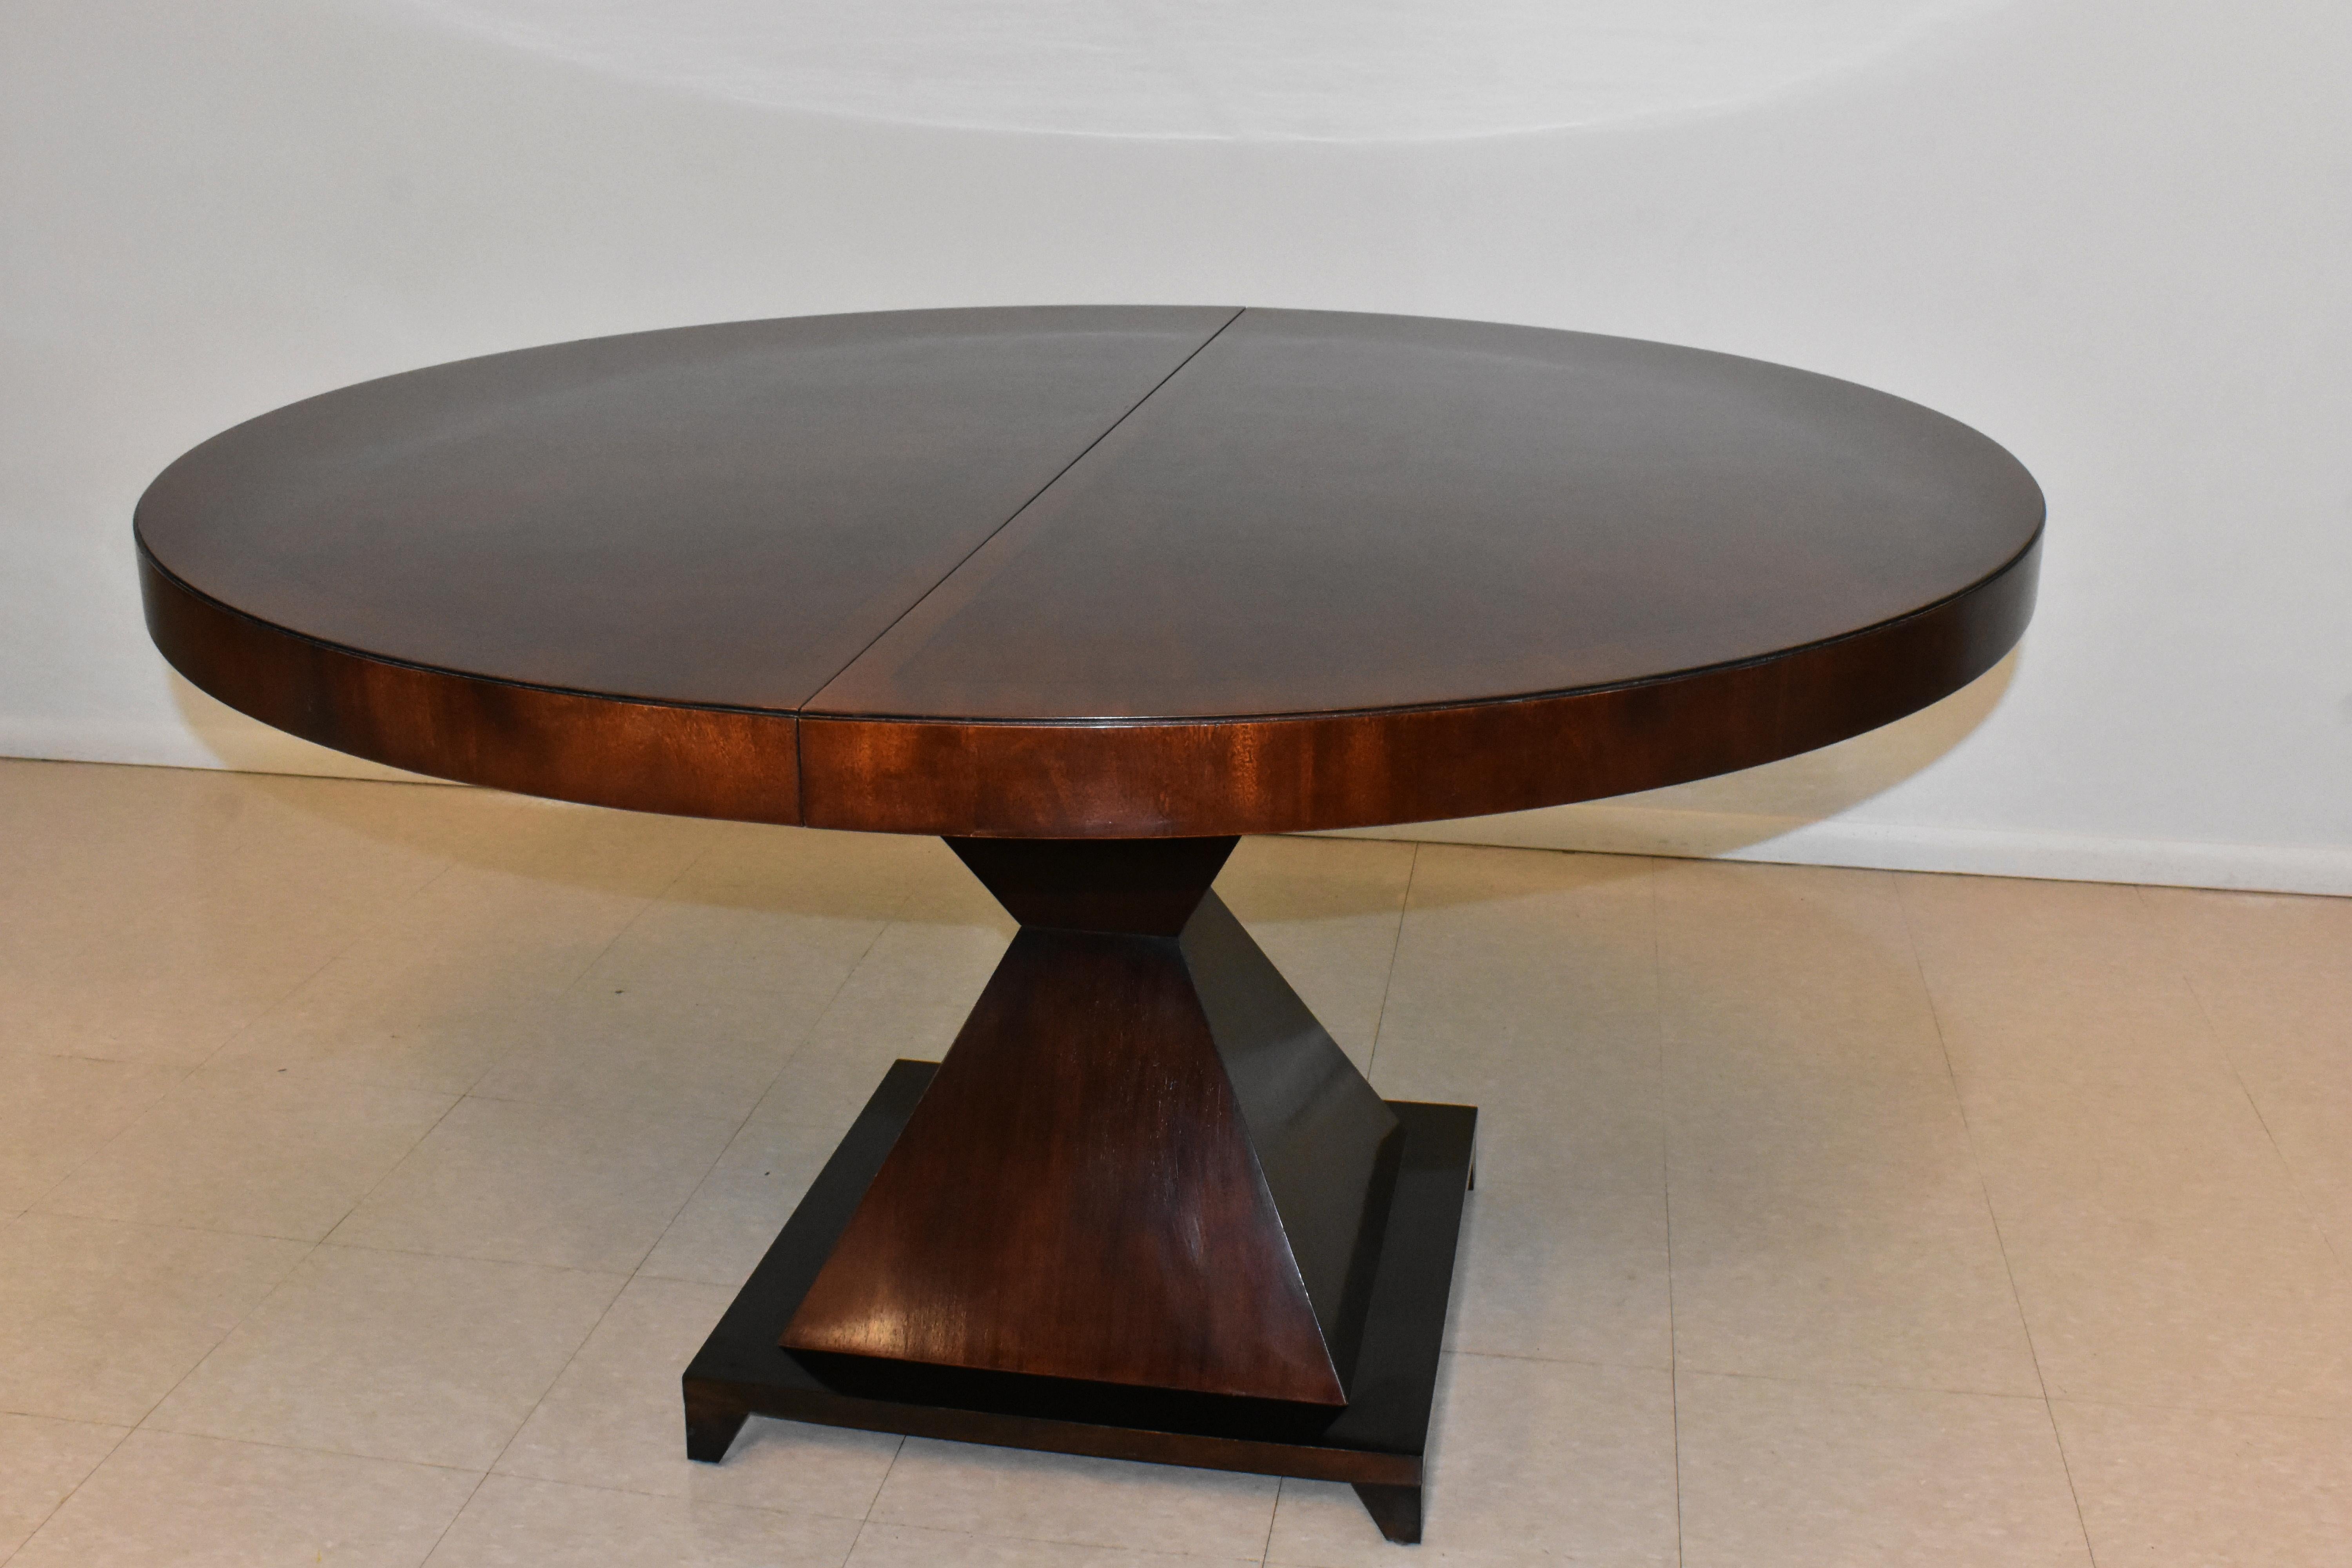 Lilian August for Hickory White Art Deco Style Dining Room Table 